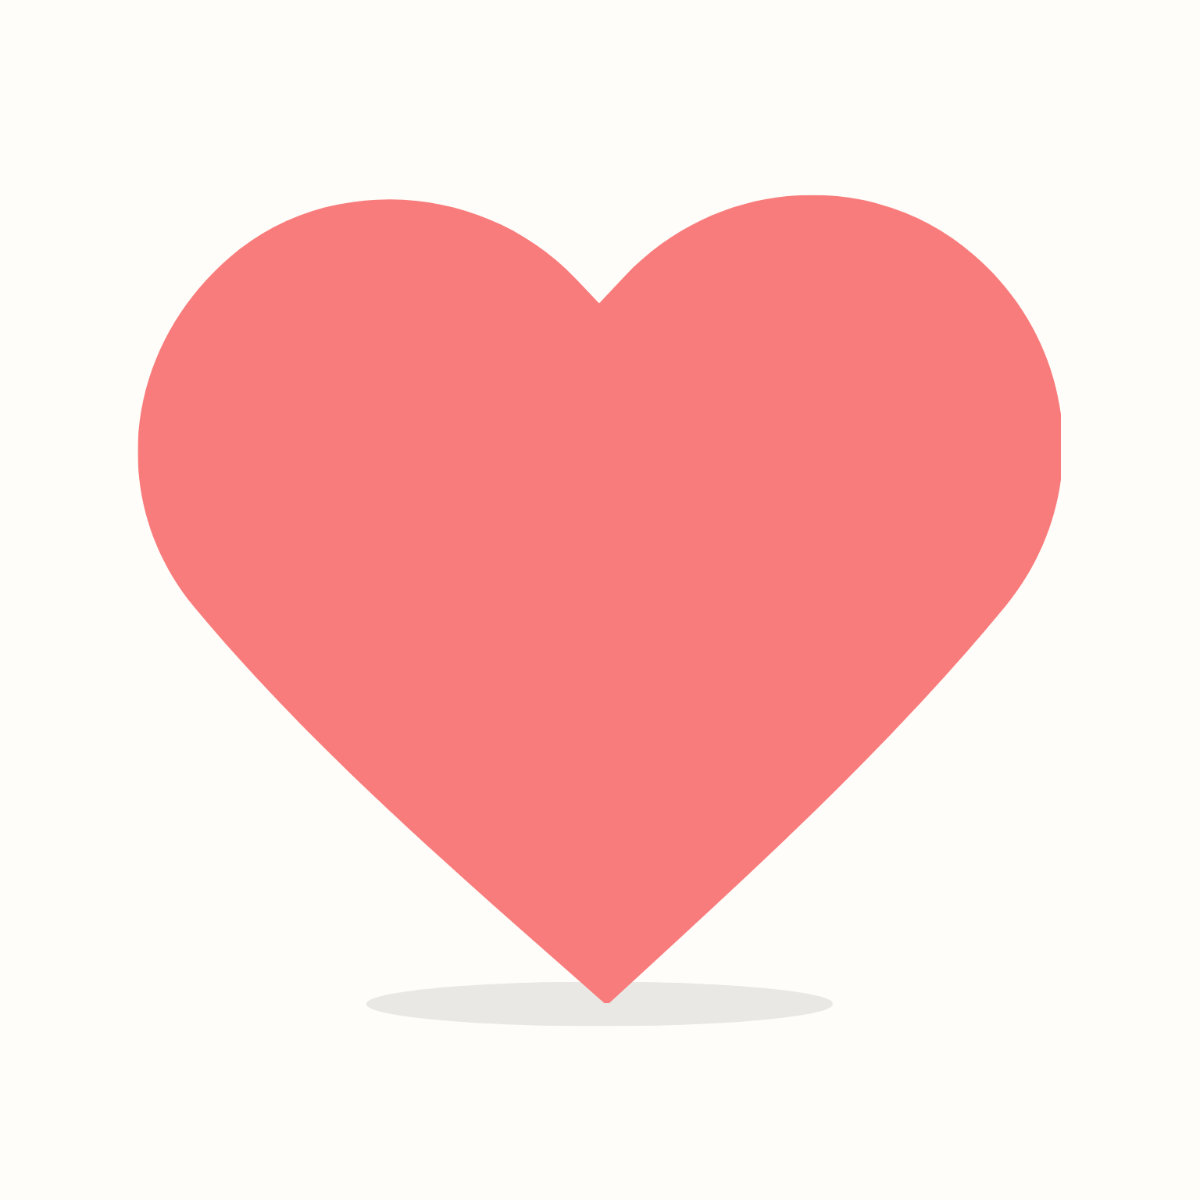 Heart Vector Image Template